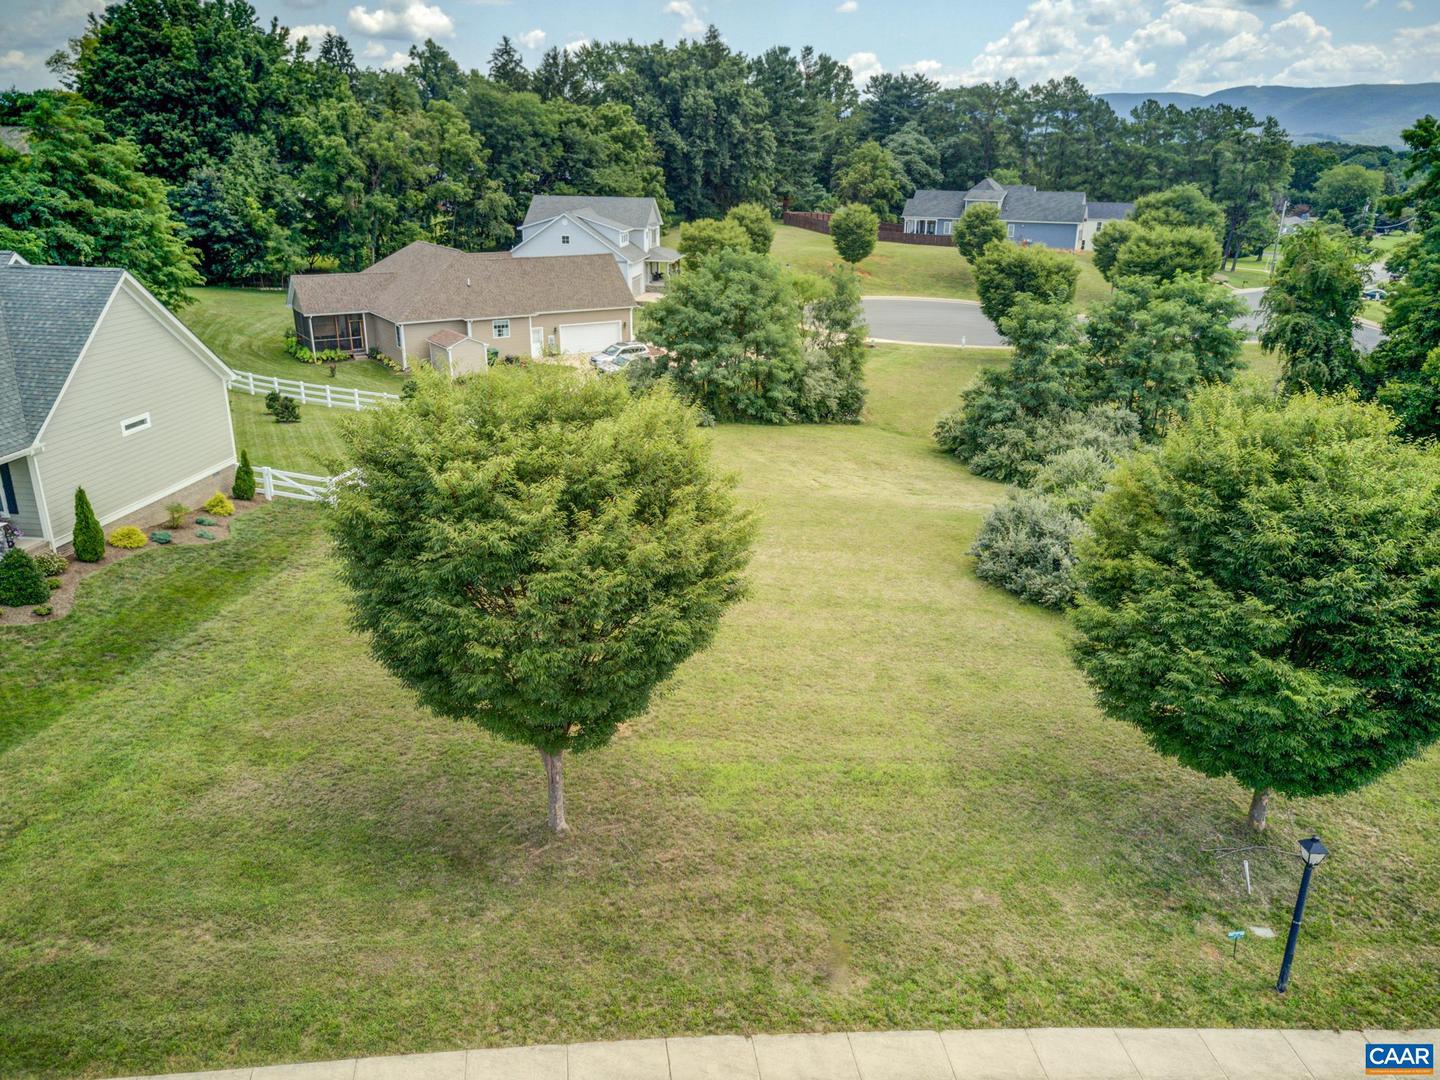 TBD FOREST DR #16, WAYNESBORO, Virginia 22980, ,Land,For sale,TBD FOREST DR #16,644744 MLS # 644744